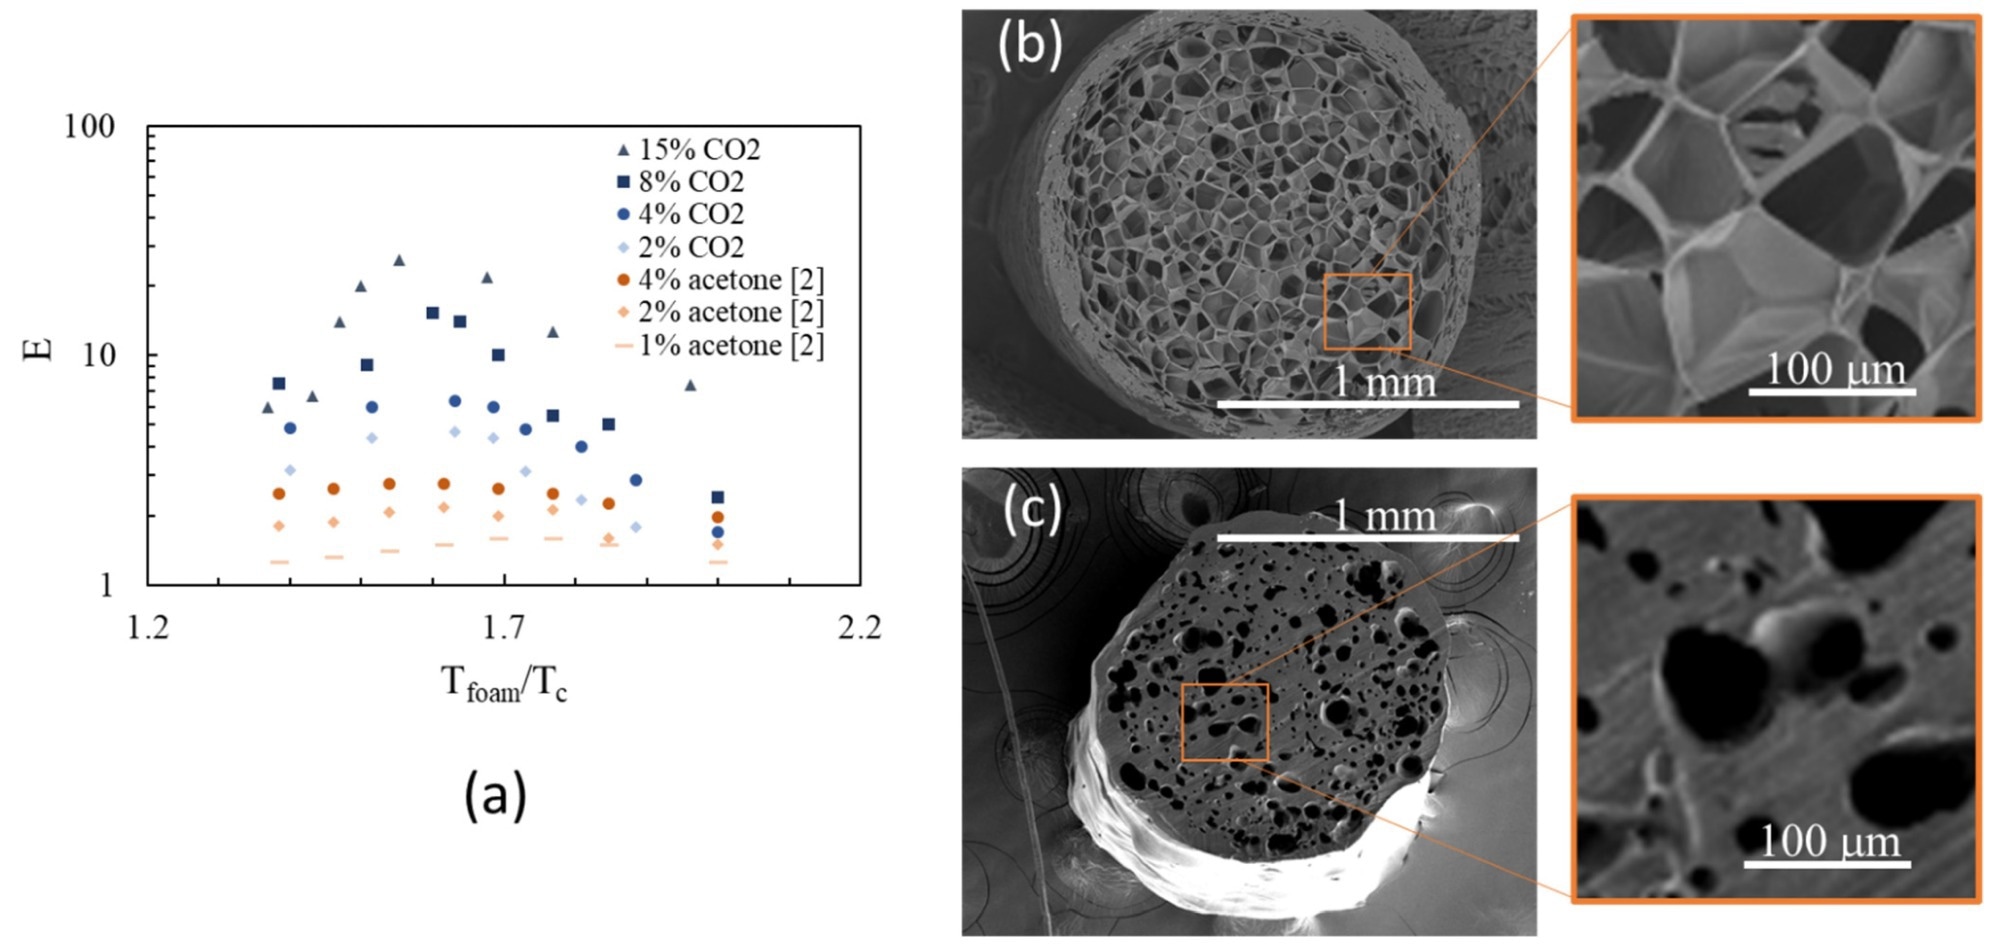 (a) Comparison between the expansion ratios achieved with CO2 (this work) and acetone [2]. SEM images of the cross section of a strand foamed with CO2 (b) and acetone (c).